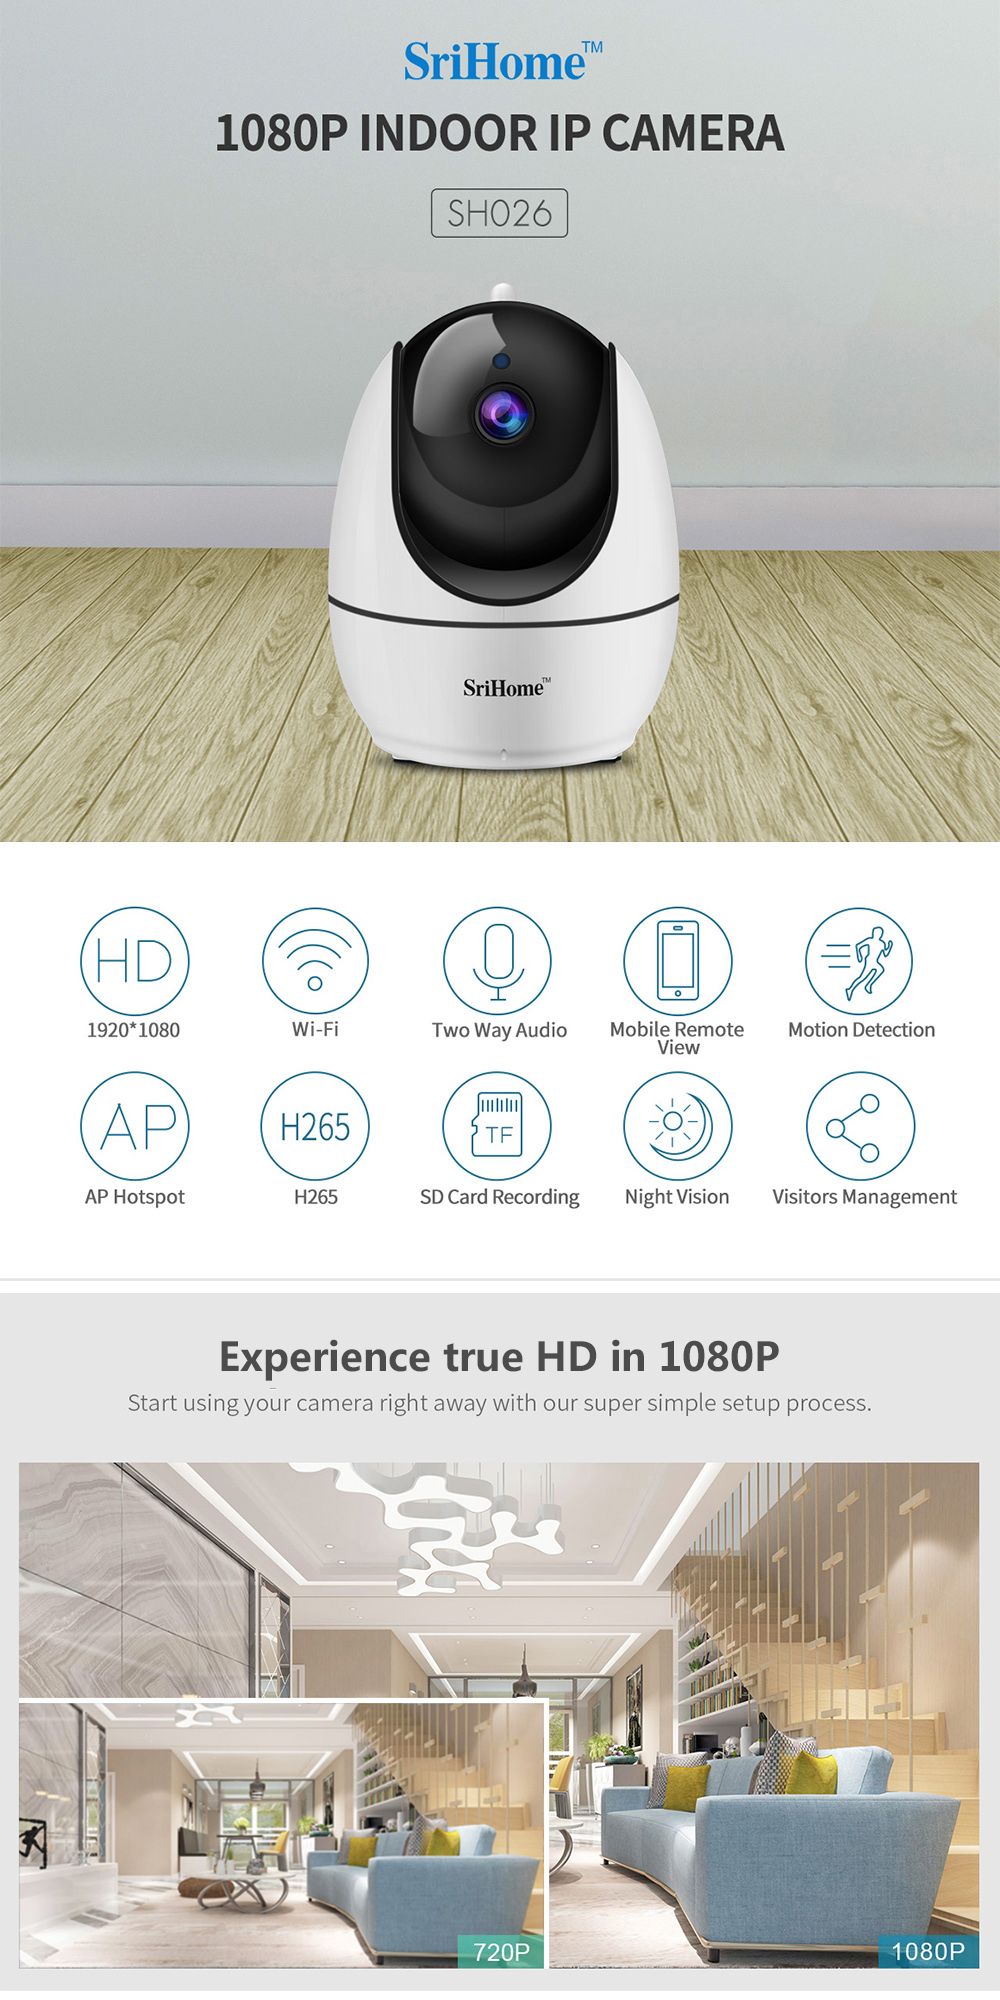 Sricam-SH026-WiFi-IP-Camera-1080P-Wireless-Security-HD-24G-Smart-Networking-Night-Vision-for-Smart-H-1527201